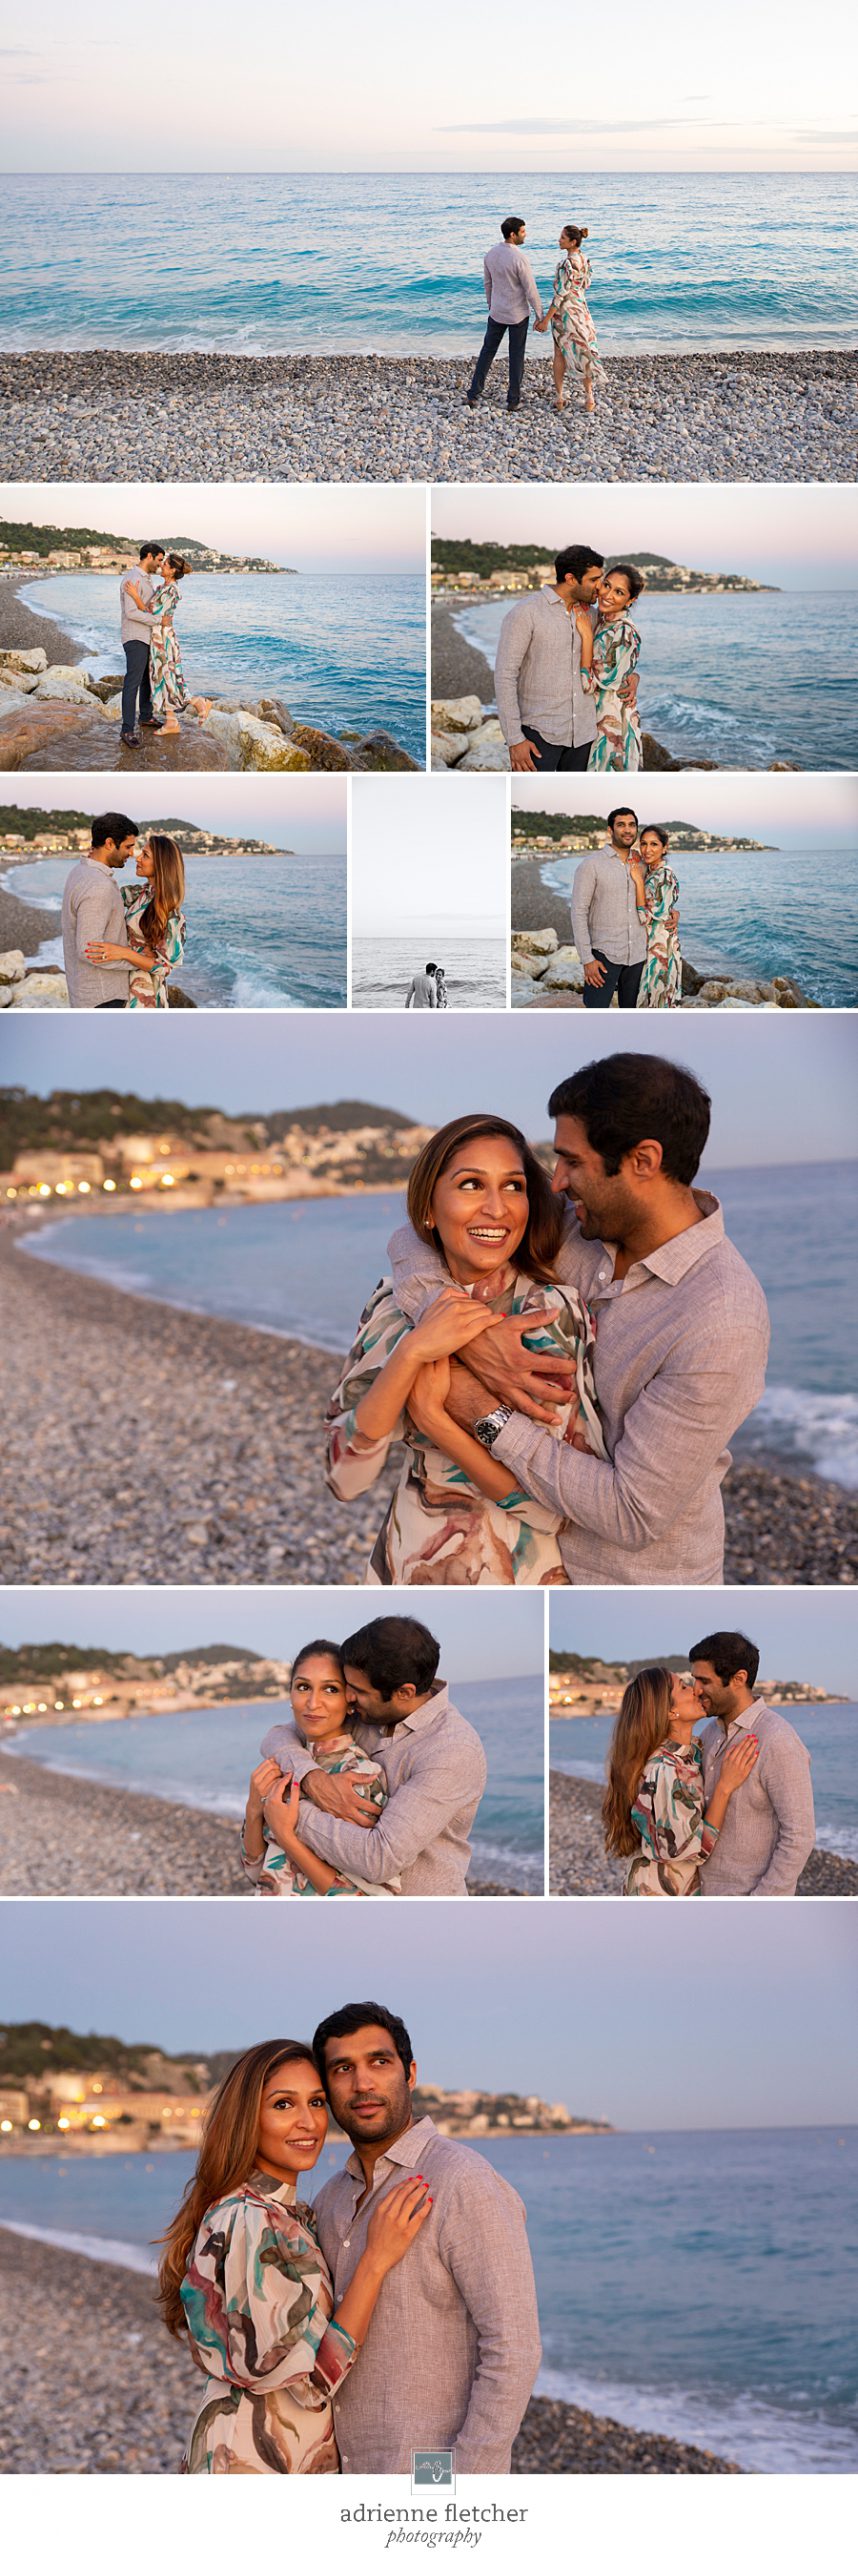 portraits of couple on beach in Nice